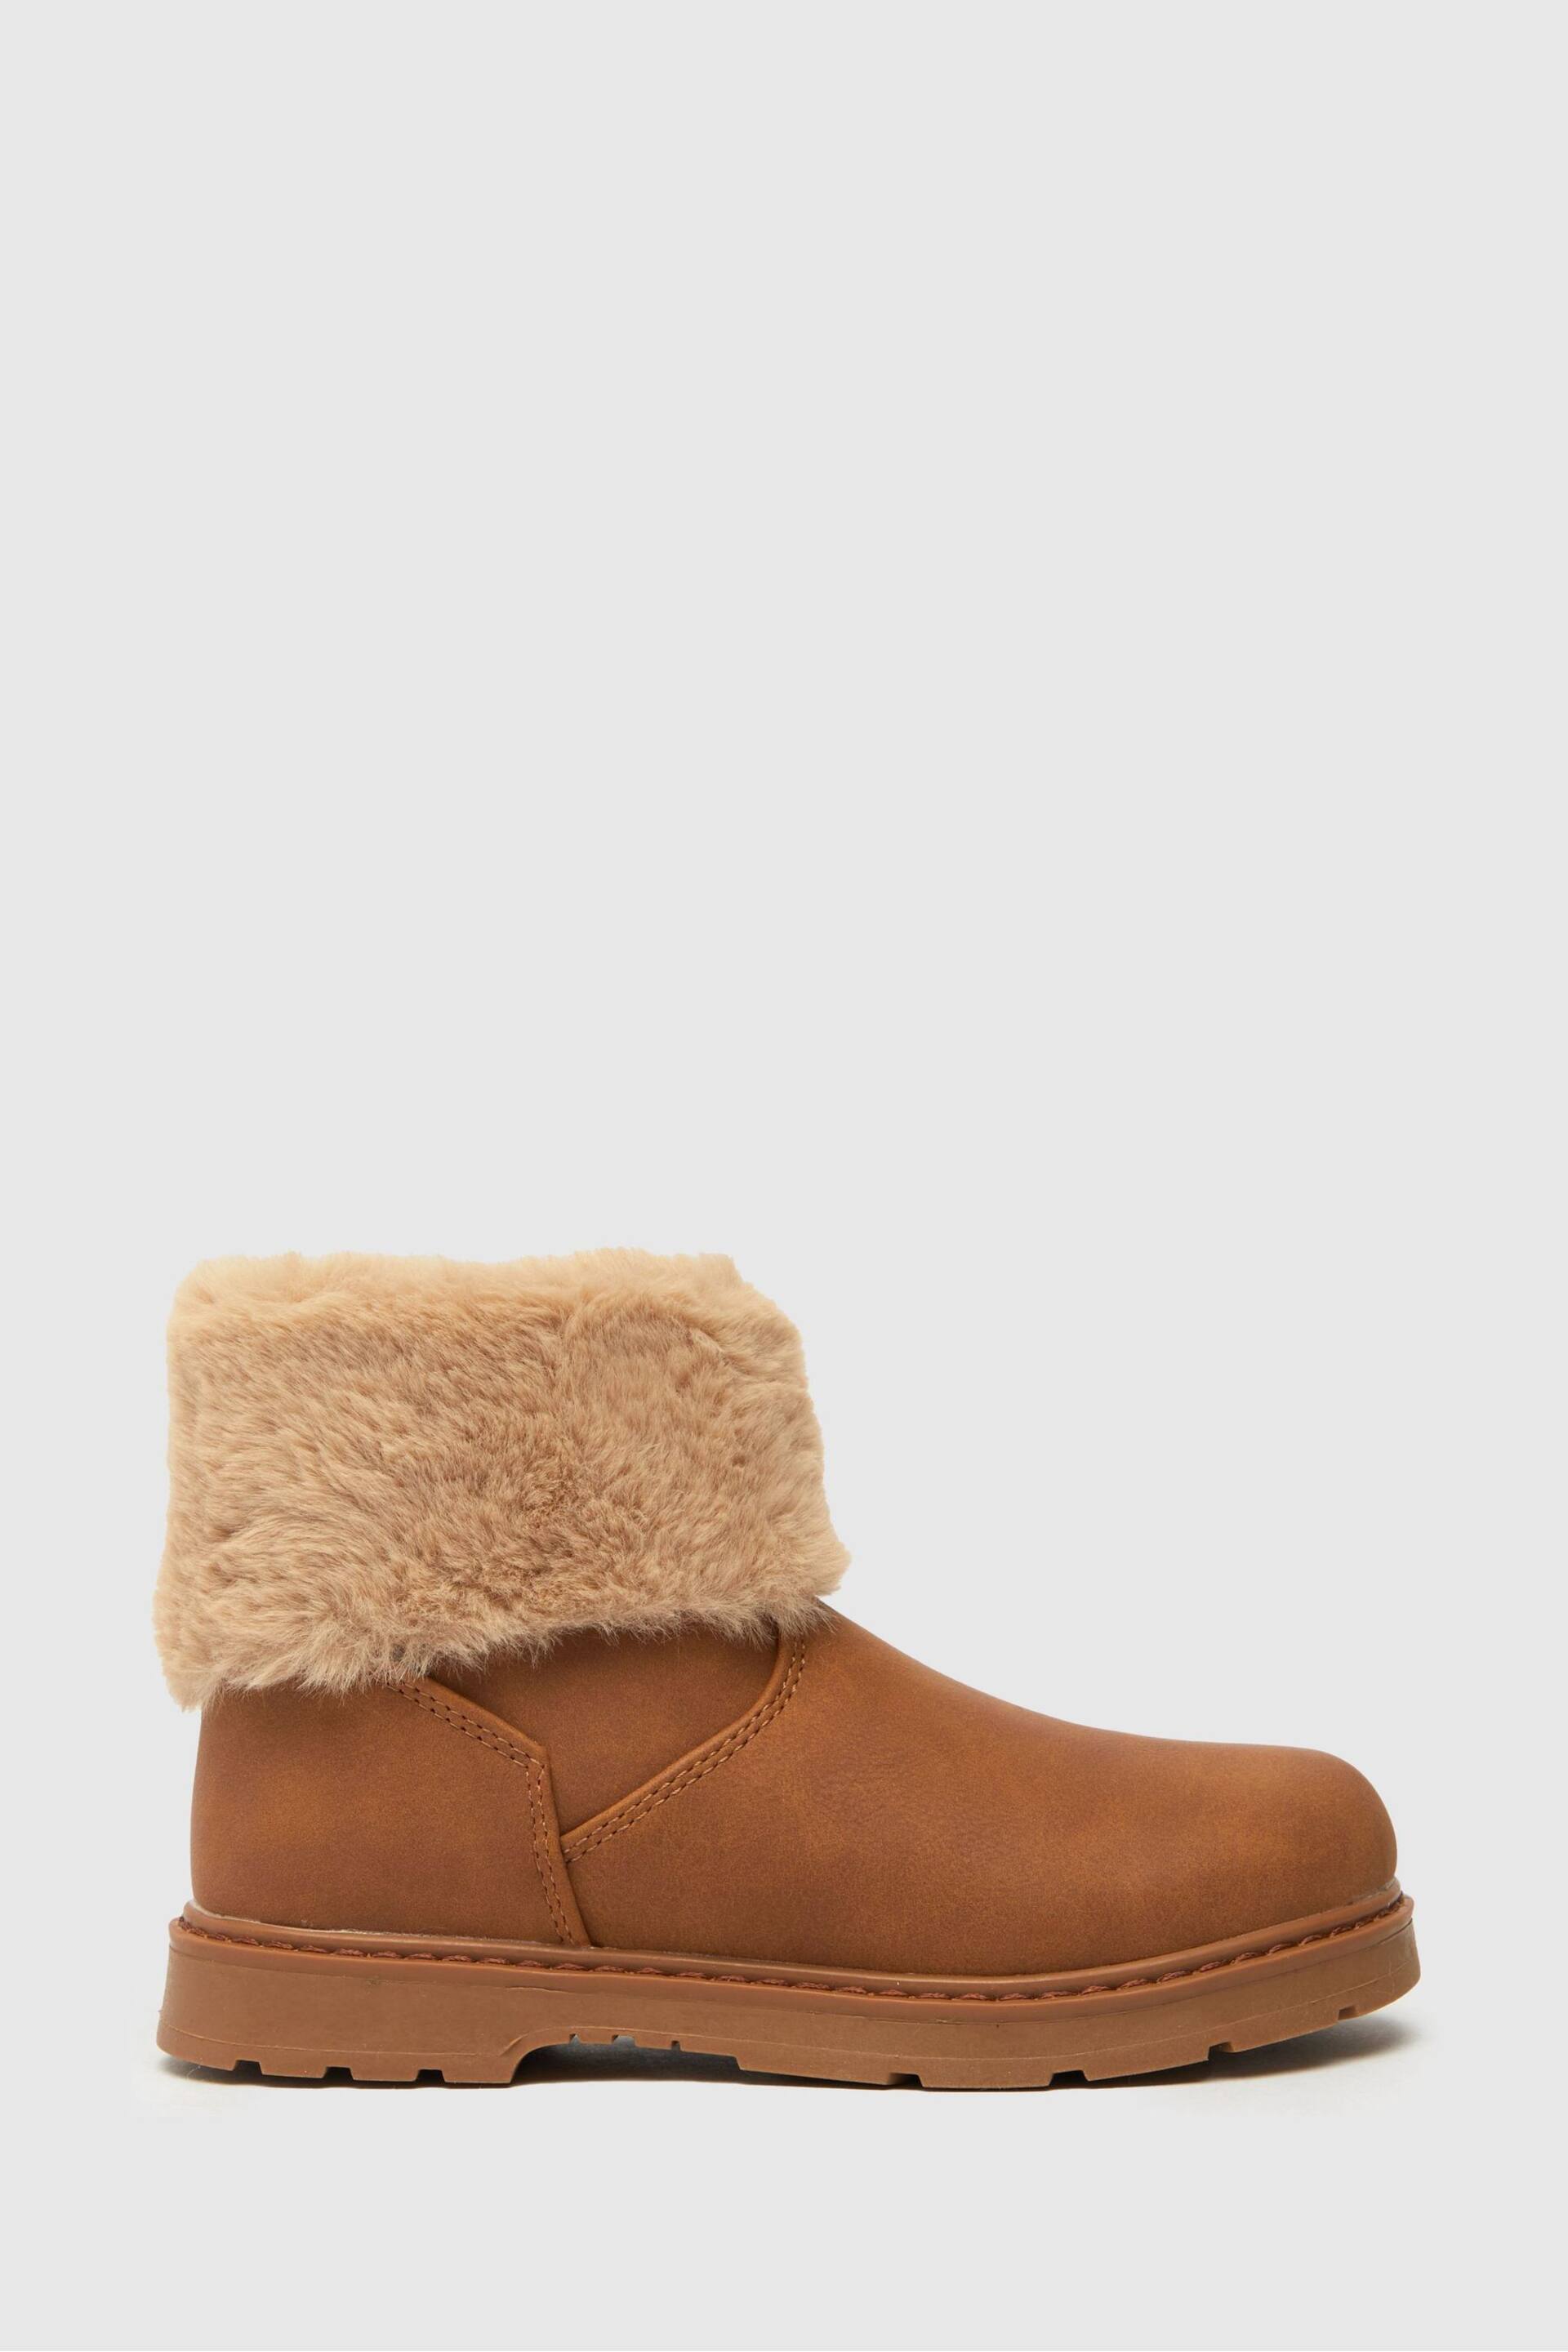 Schuh Charisma Natural Faux Fur Boots - Image 1 of 4